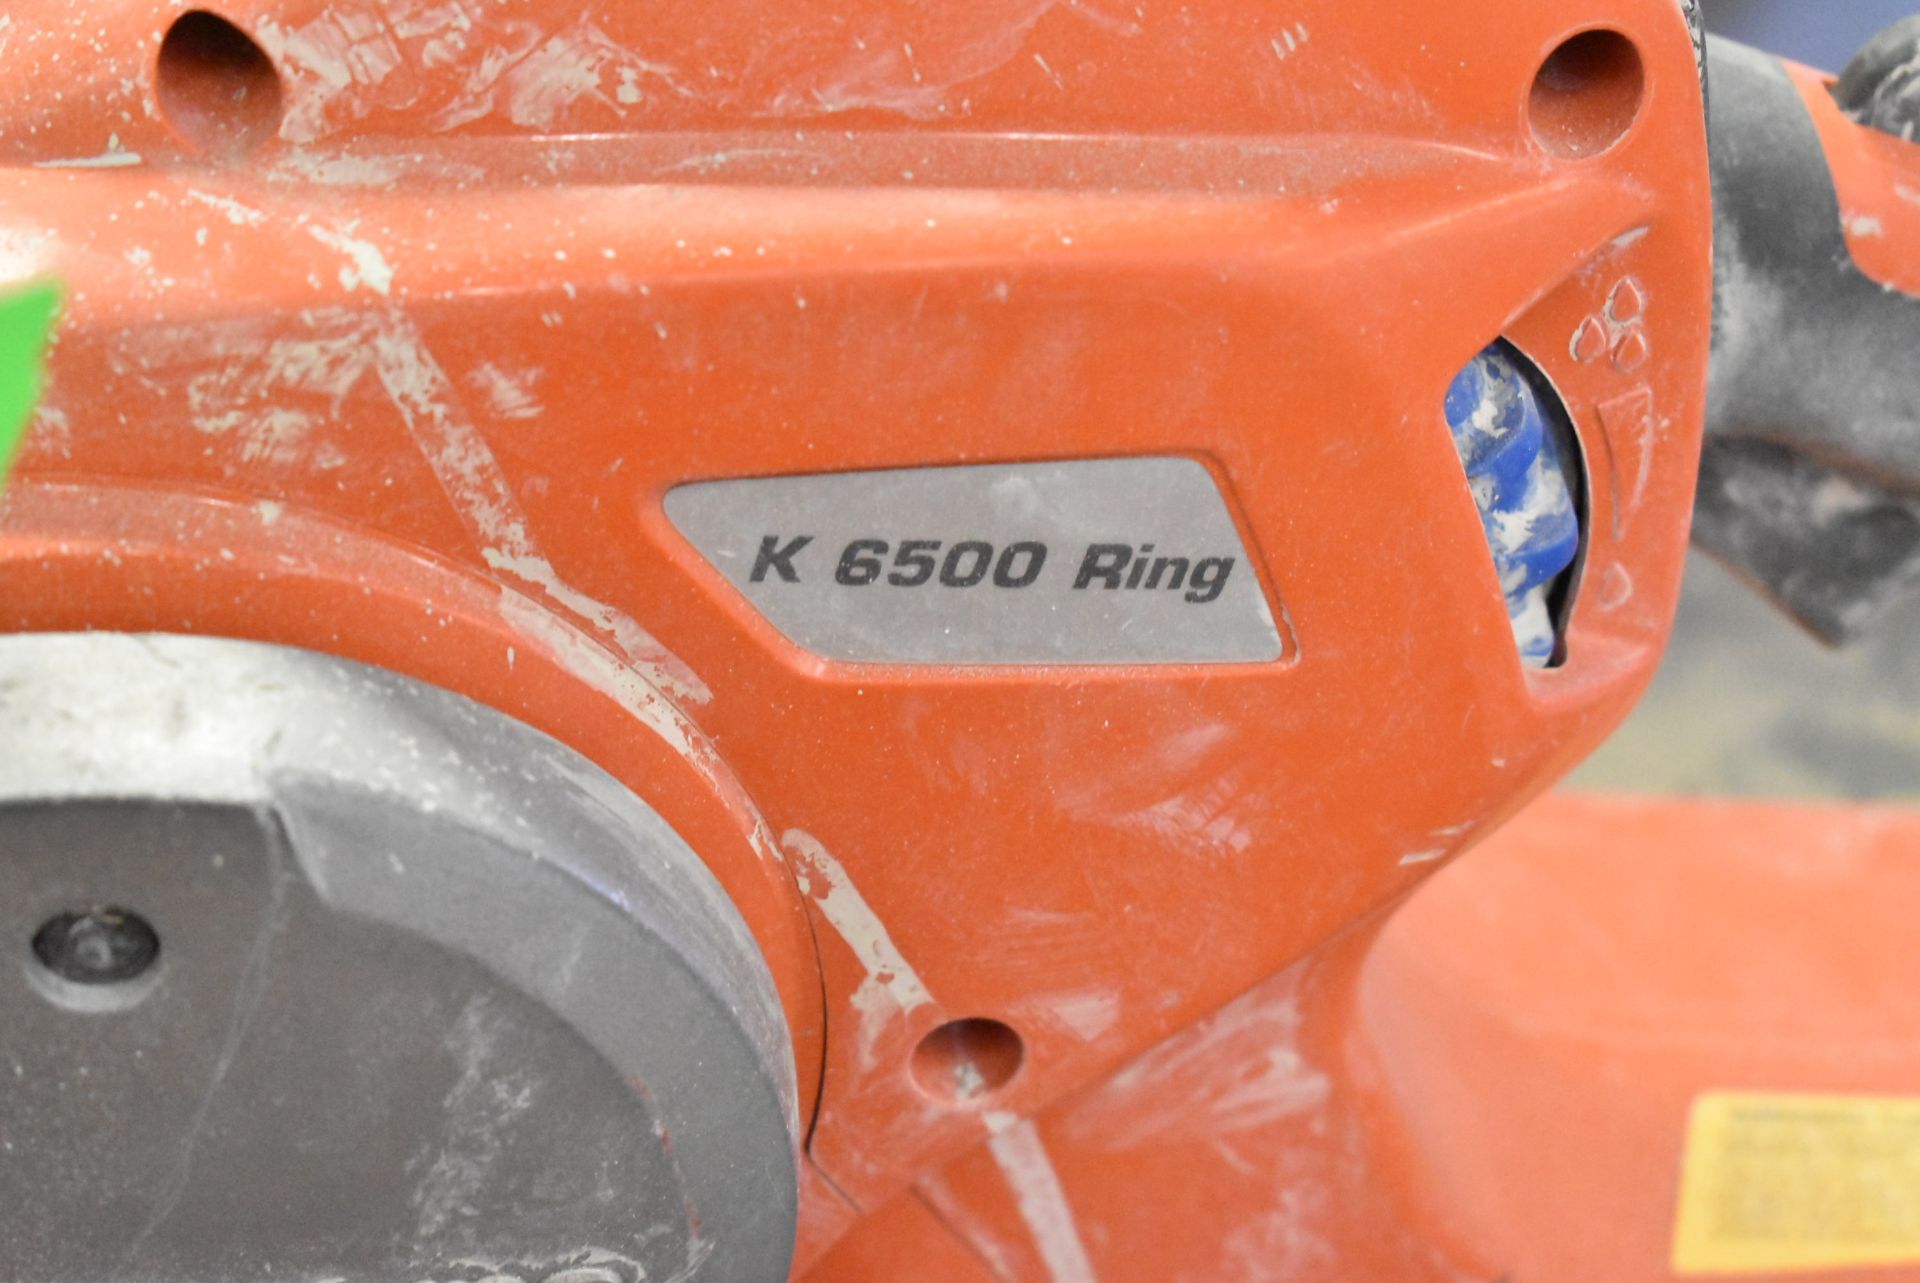 HUSQVARNA K6500 RING ELECTRIC POWERED QUICK CUT SAW, S/N N/A - Image 3 of 3